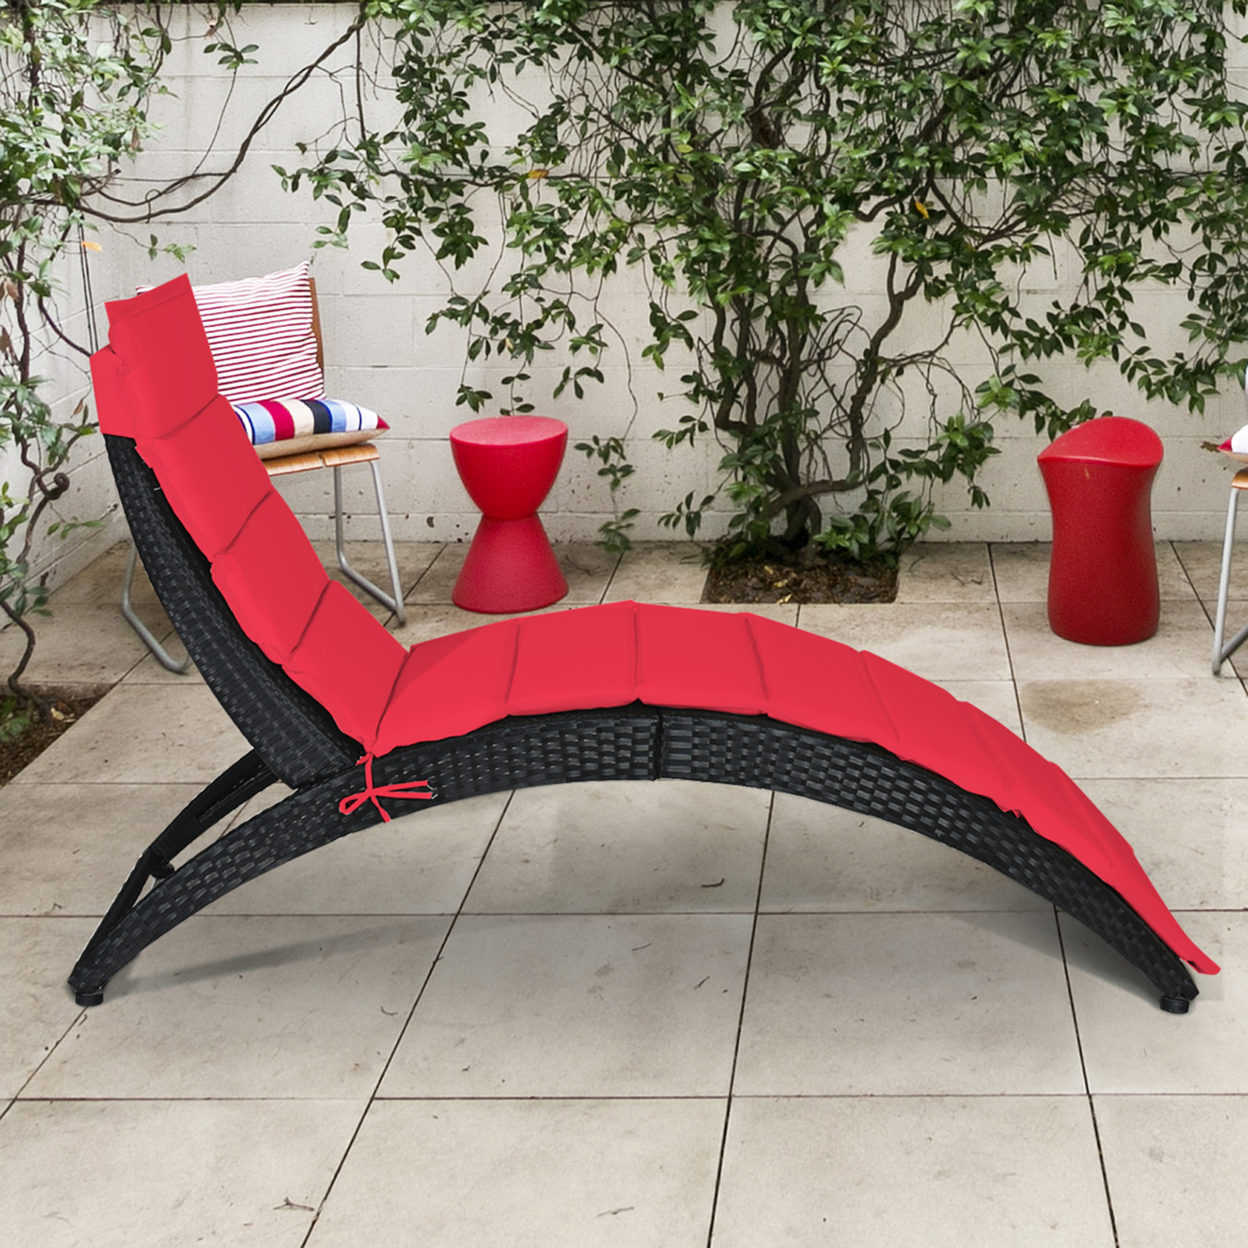 Foldable Rattan Wicker Chaise Lounge Chair W/ Red Cushion Patio Outdoor